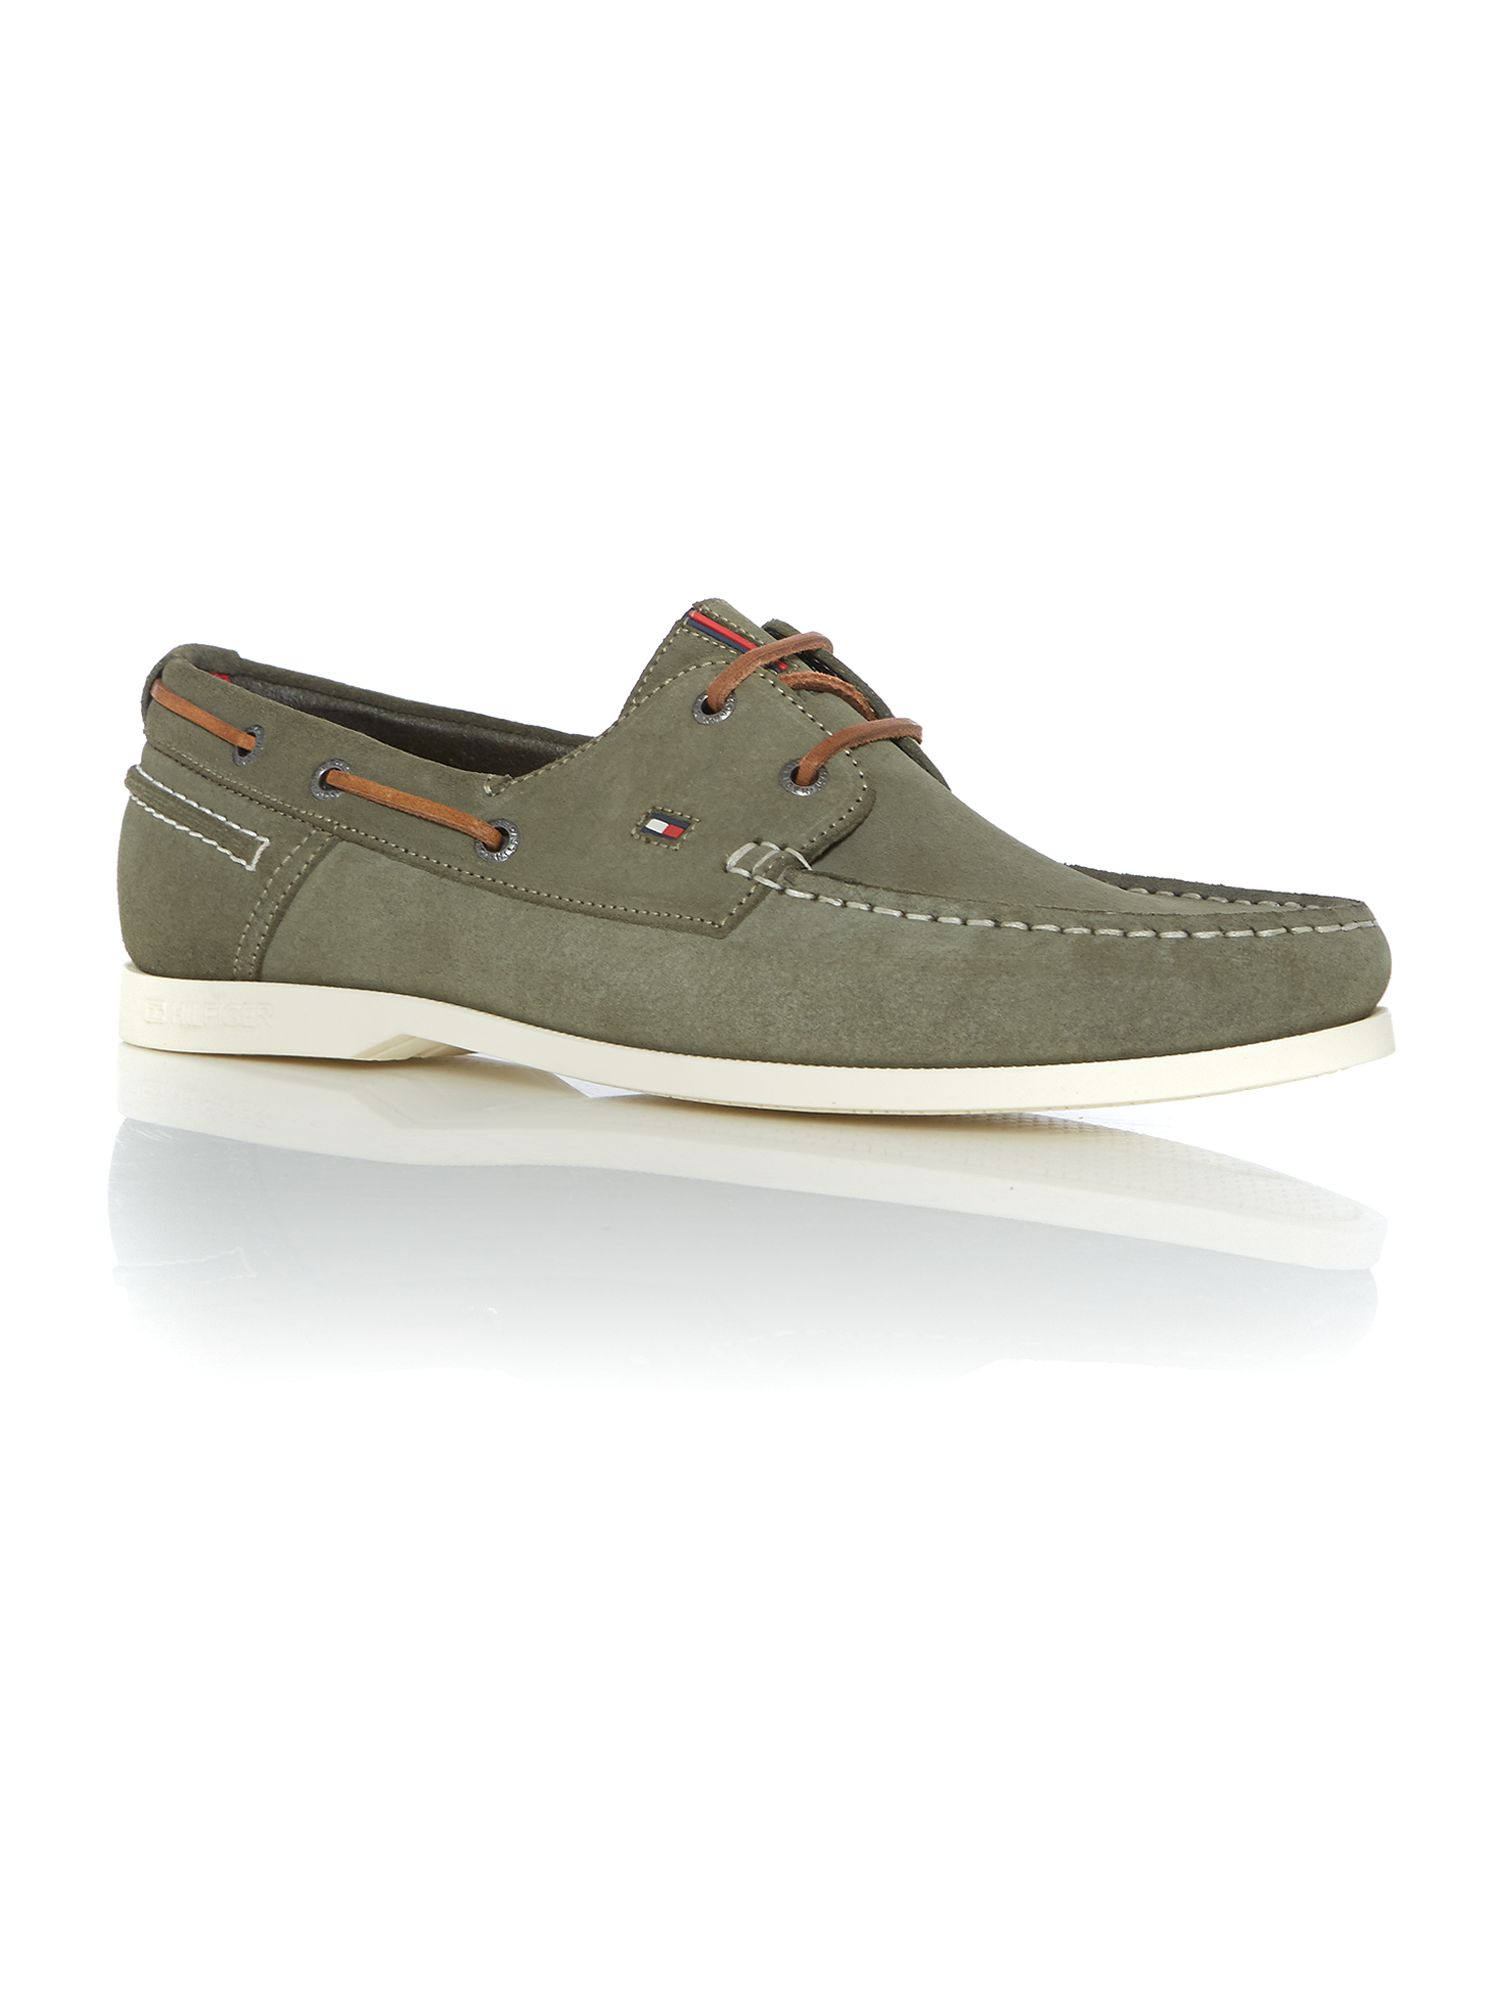 Tommy hilfiger Chino Lace Up Casual Boat Shoes in Green